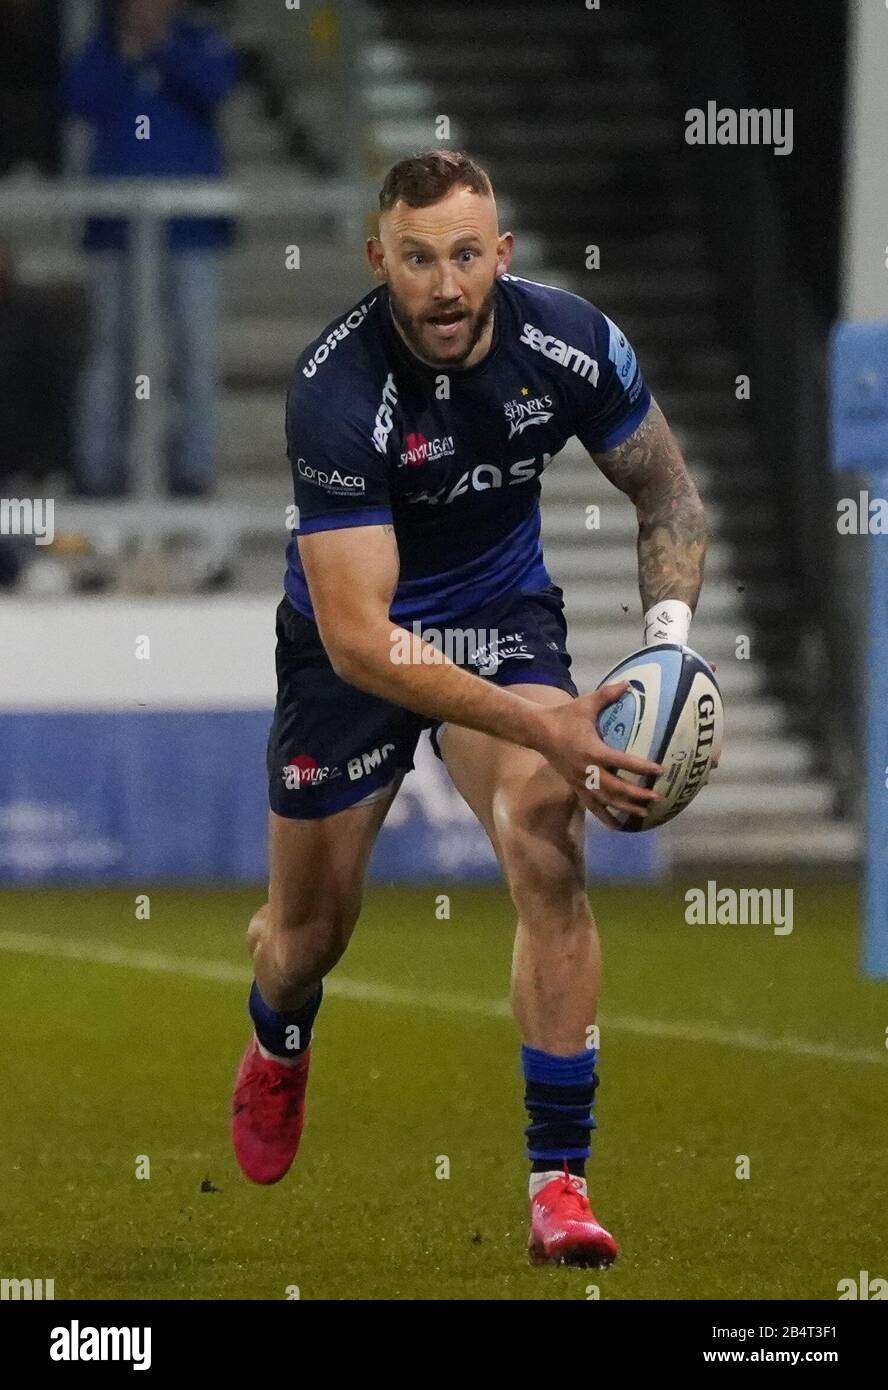 Sale Sharks Byron McGuigan runs in for a try during a Gallagher Premiership Rugby Union match won by Sharks 39-0, Friday, Mar. 6, 2020, in Eccles, United Kingdom. (Photo by IOS/ESPA-Images) Stock Photo